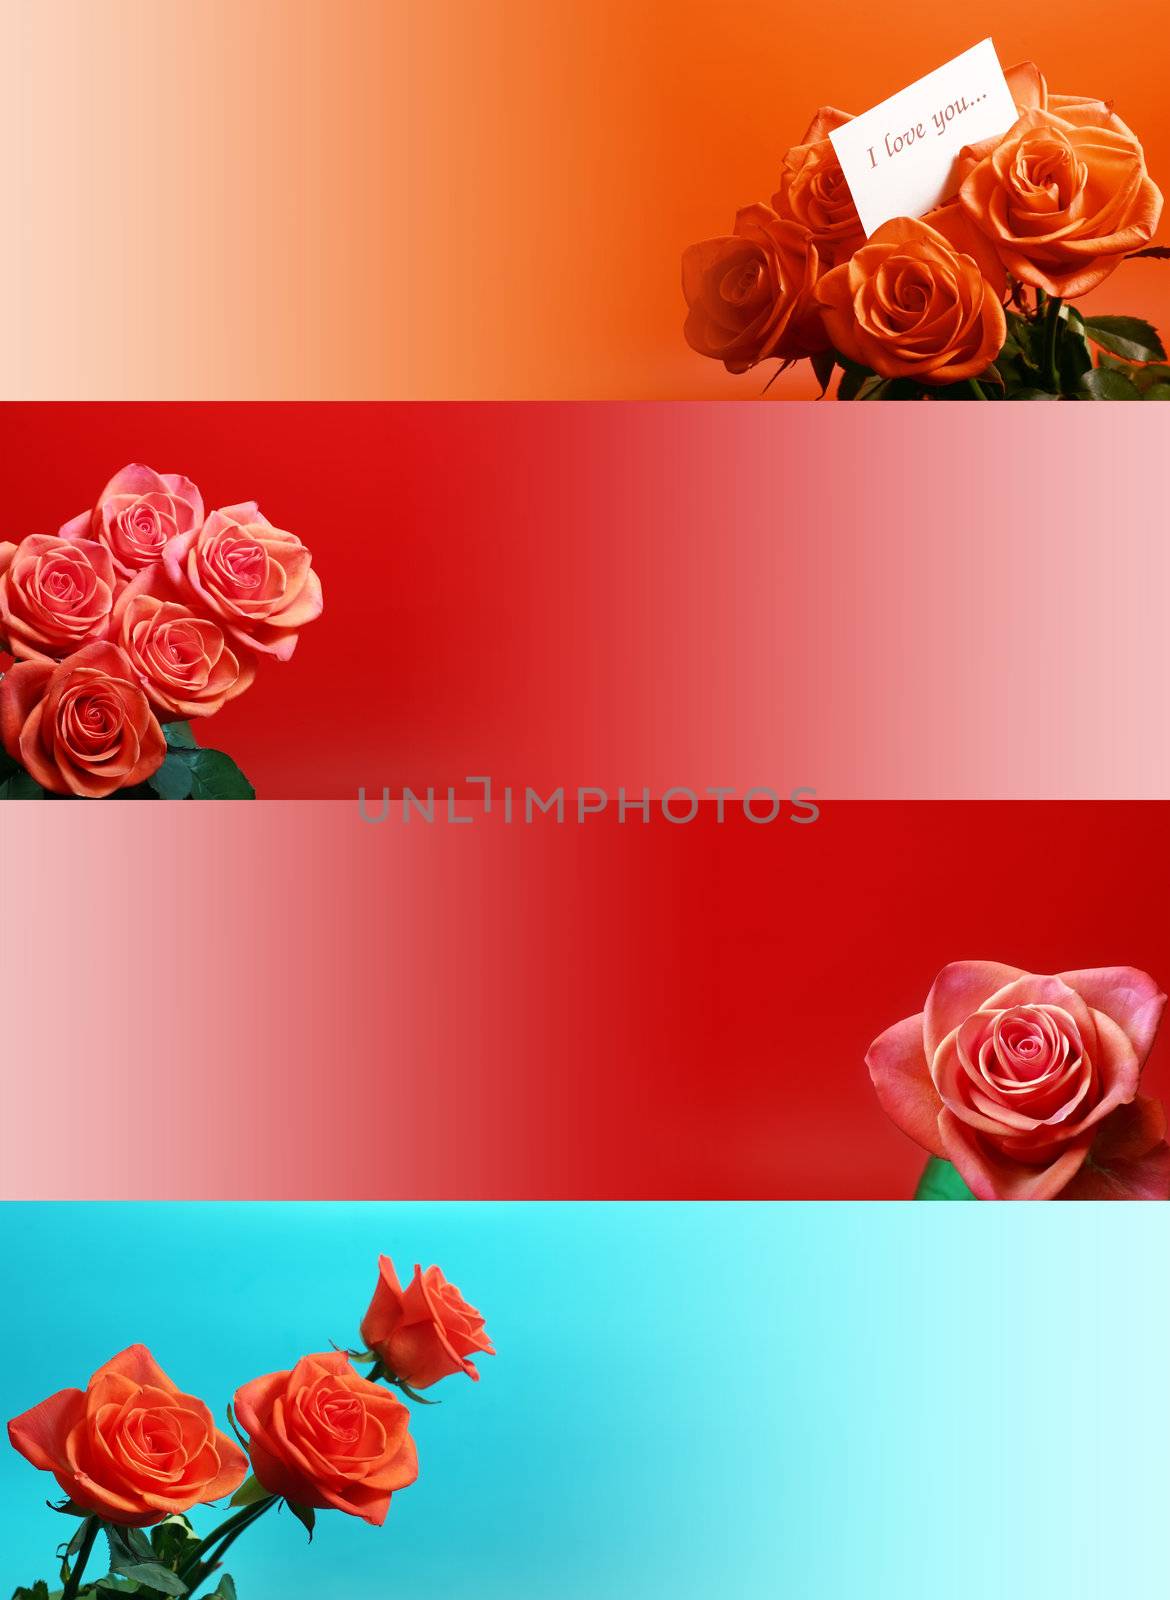 web banners with rose